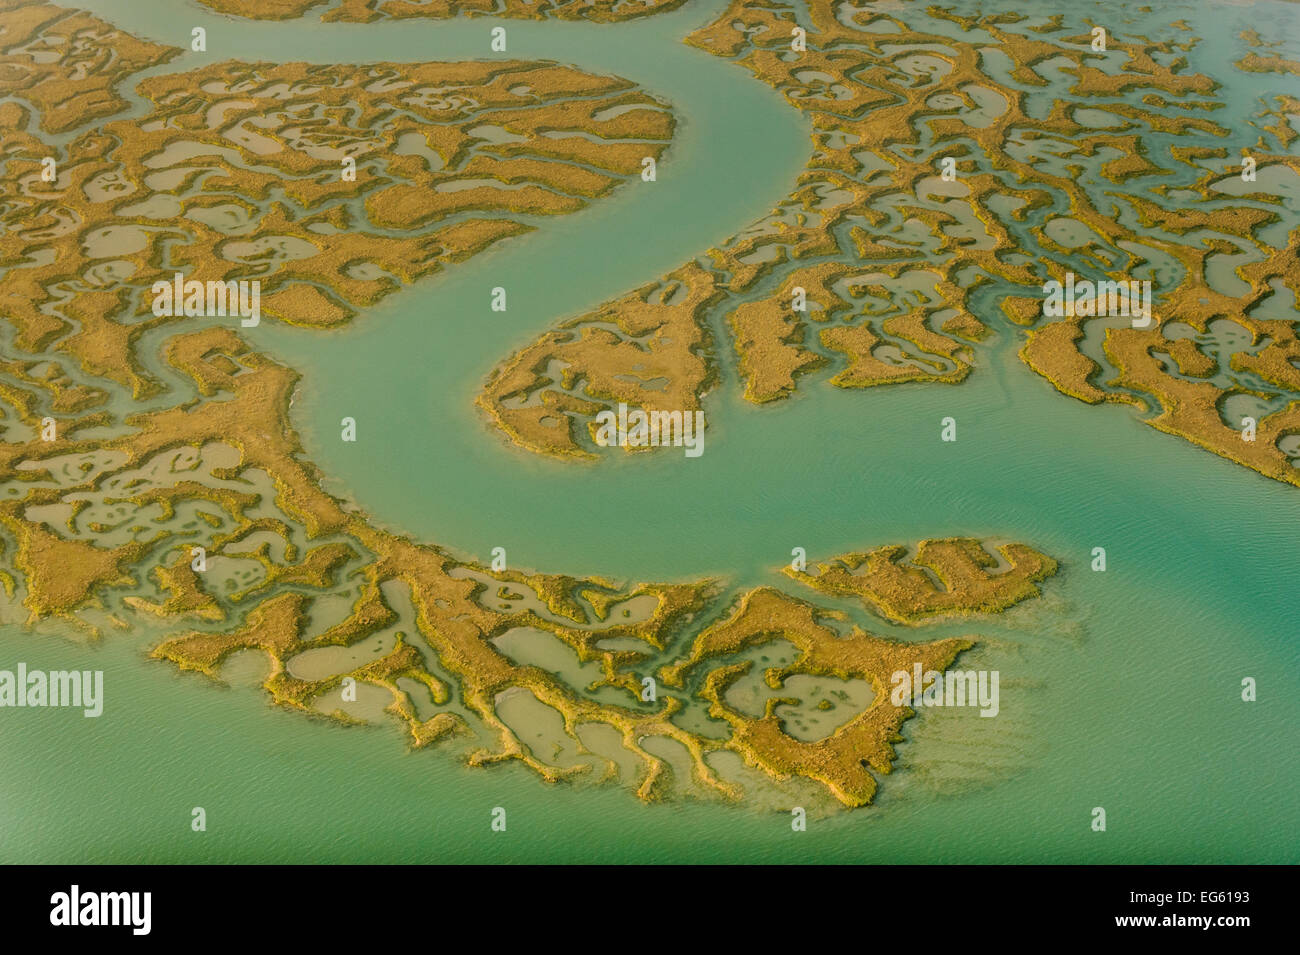 Water channels making patterns in saltmarsh, seen from the air. Abbotts Hall Farm, Essex, UK, April 2012. Did you know? Salt marshes are a great natural defence against sea level rise. Stock Photo